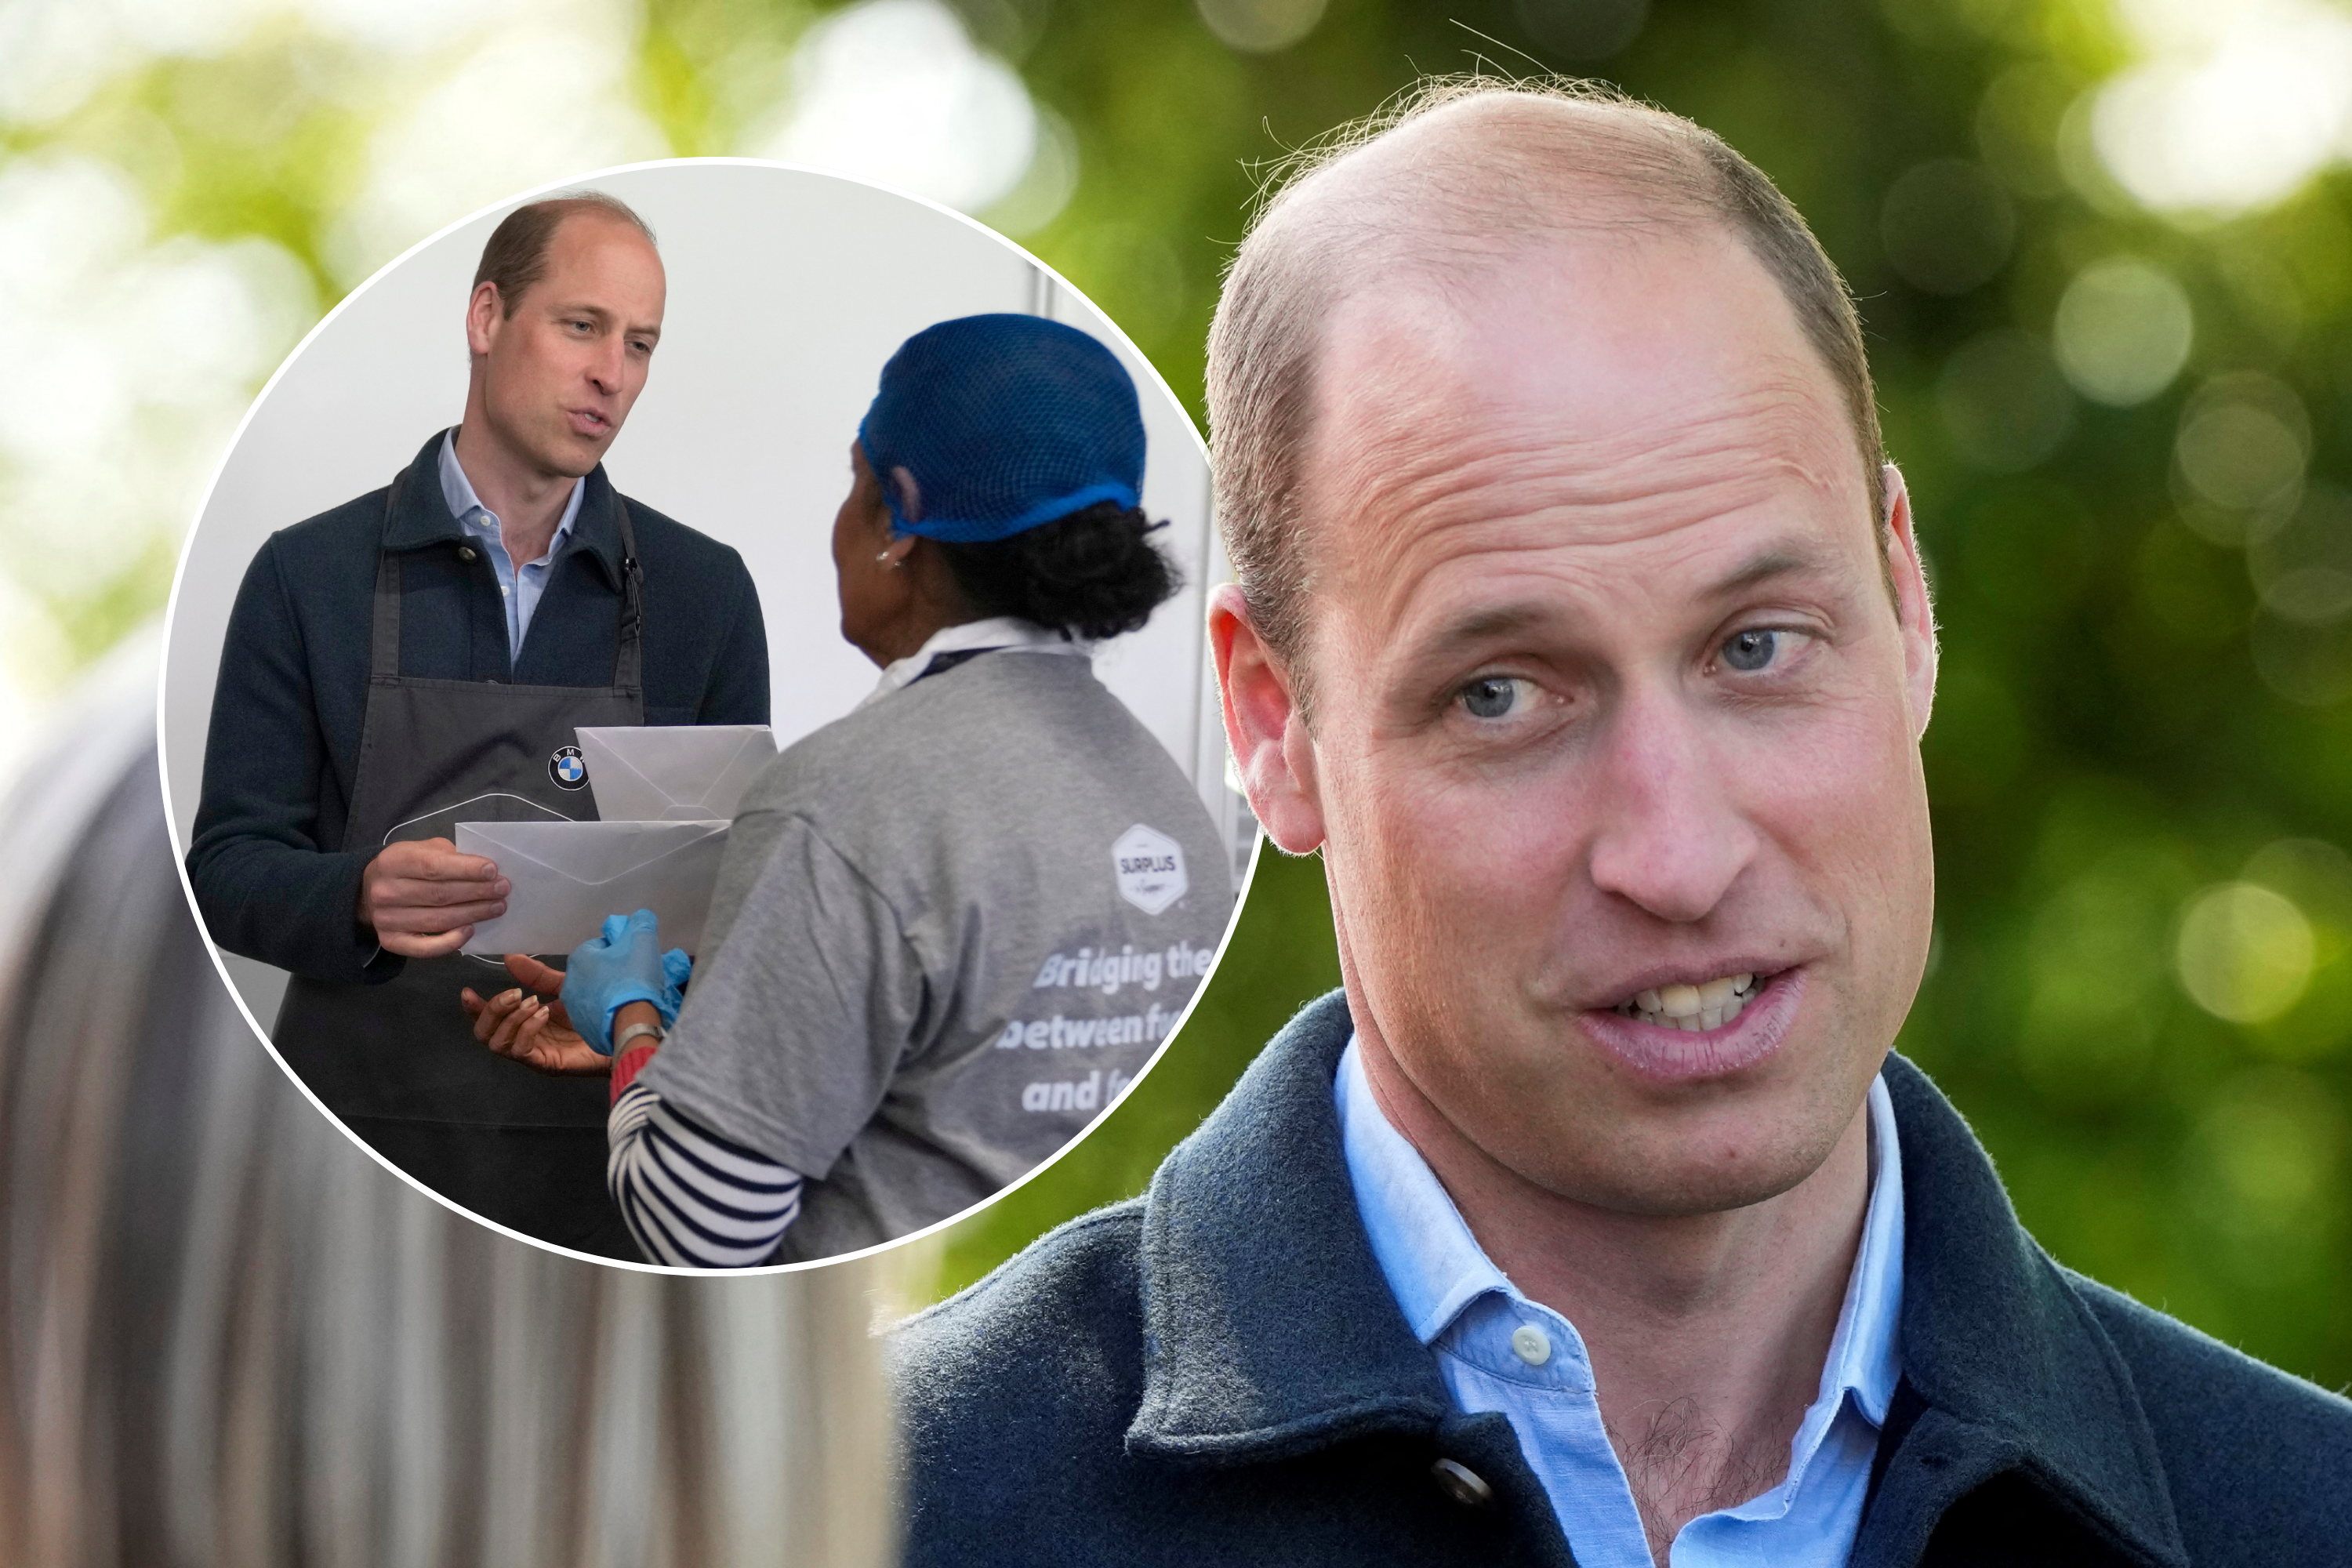 Prince William touched by kind gesture after Kate cancer news